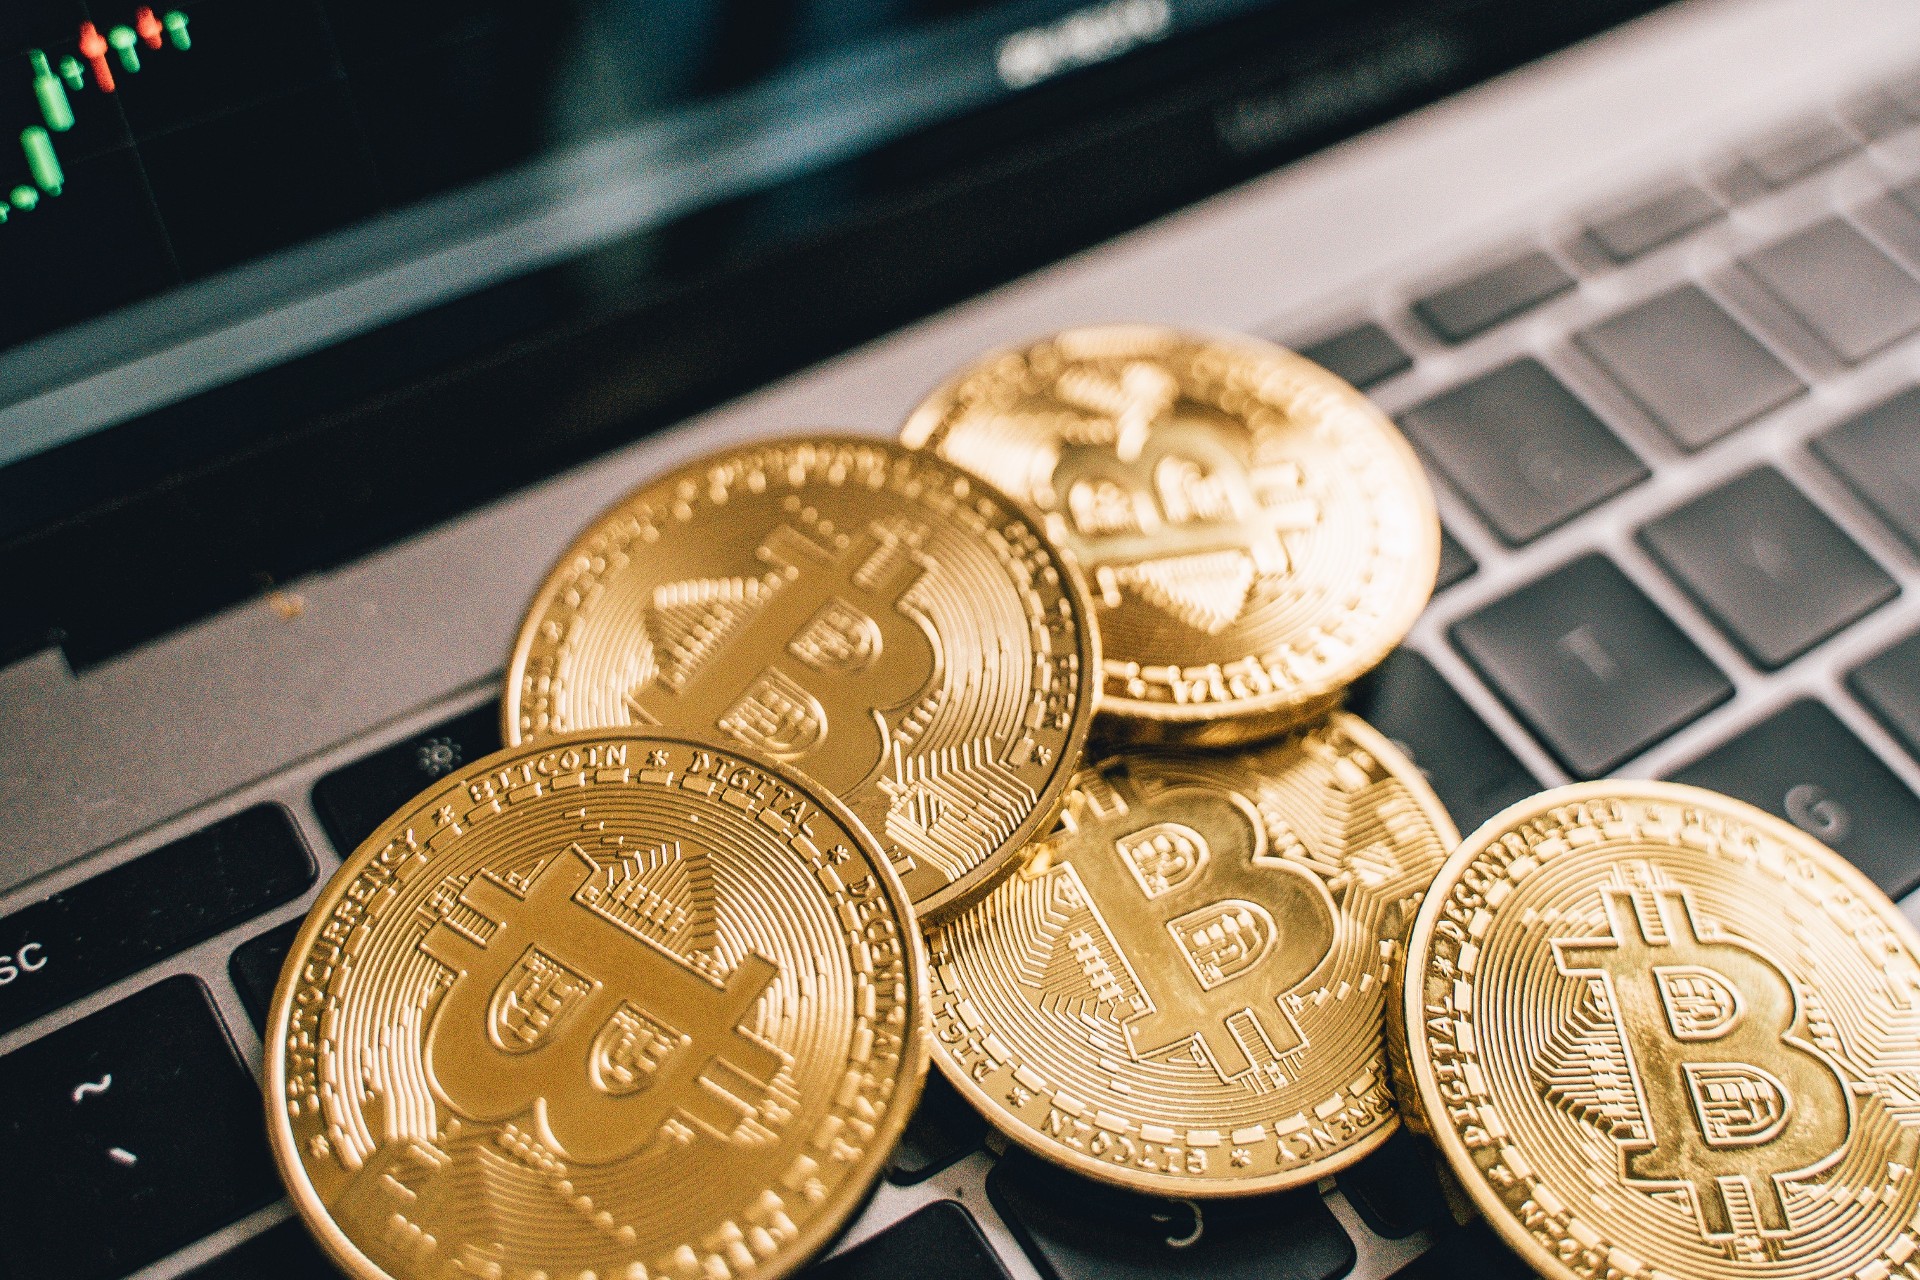 Getting the most out of your cryptocurrency means being able to trade your coins no matter where you are. Here are five apps that can help.